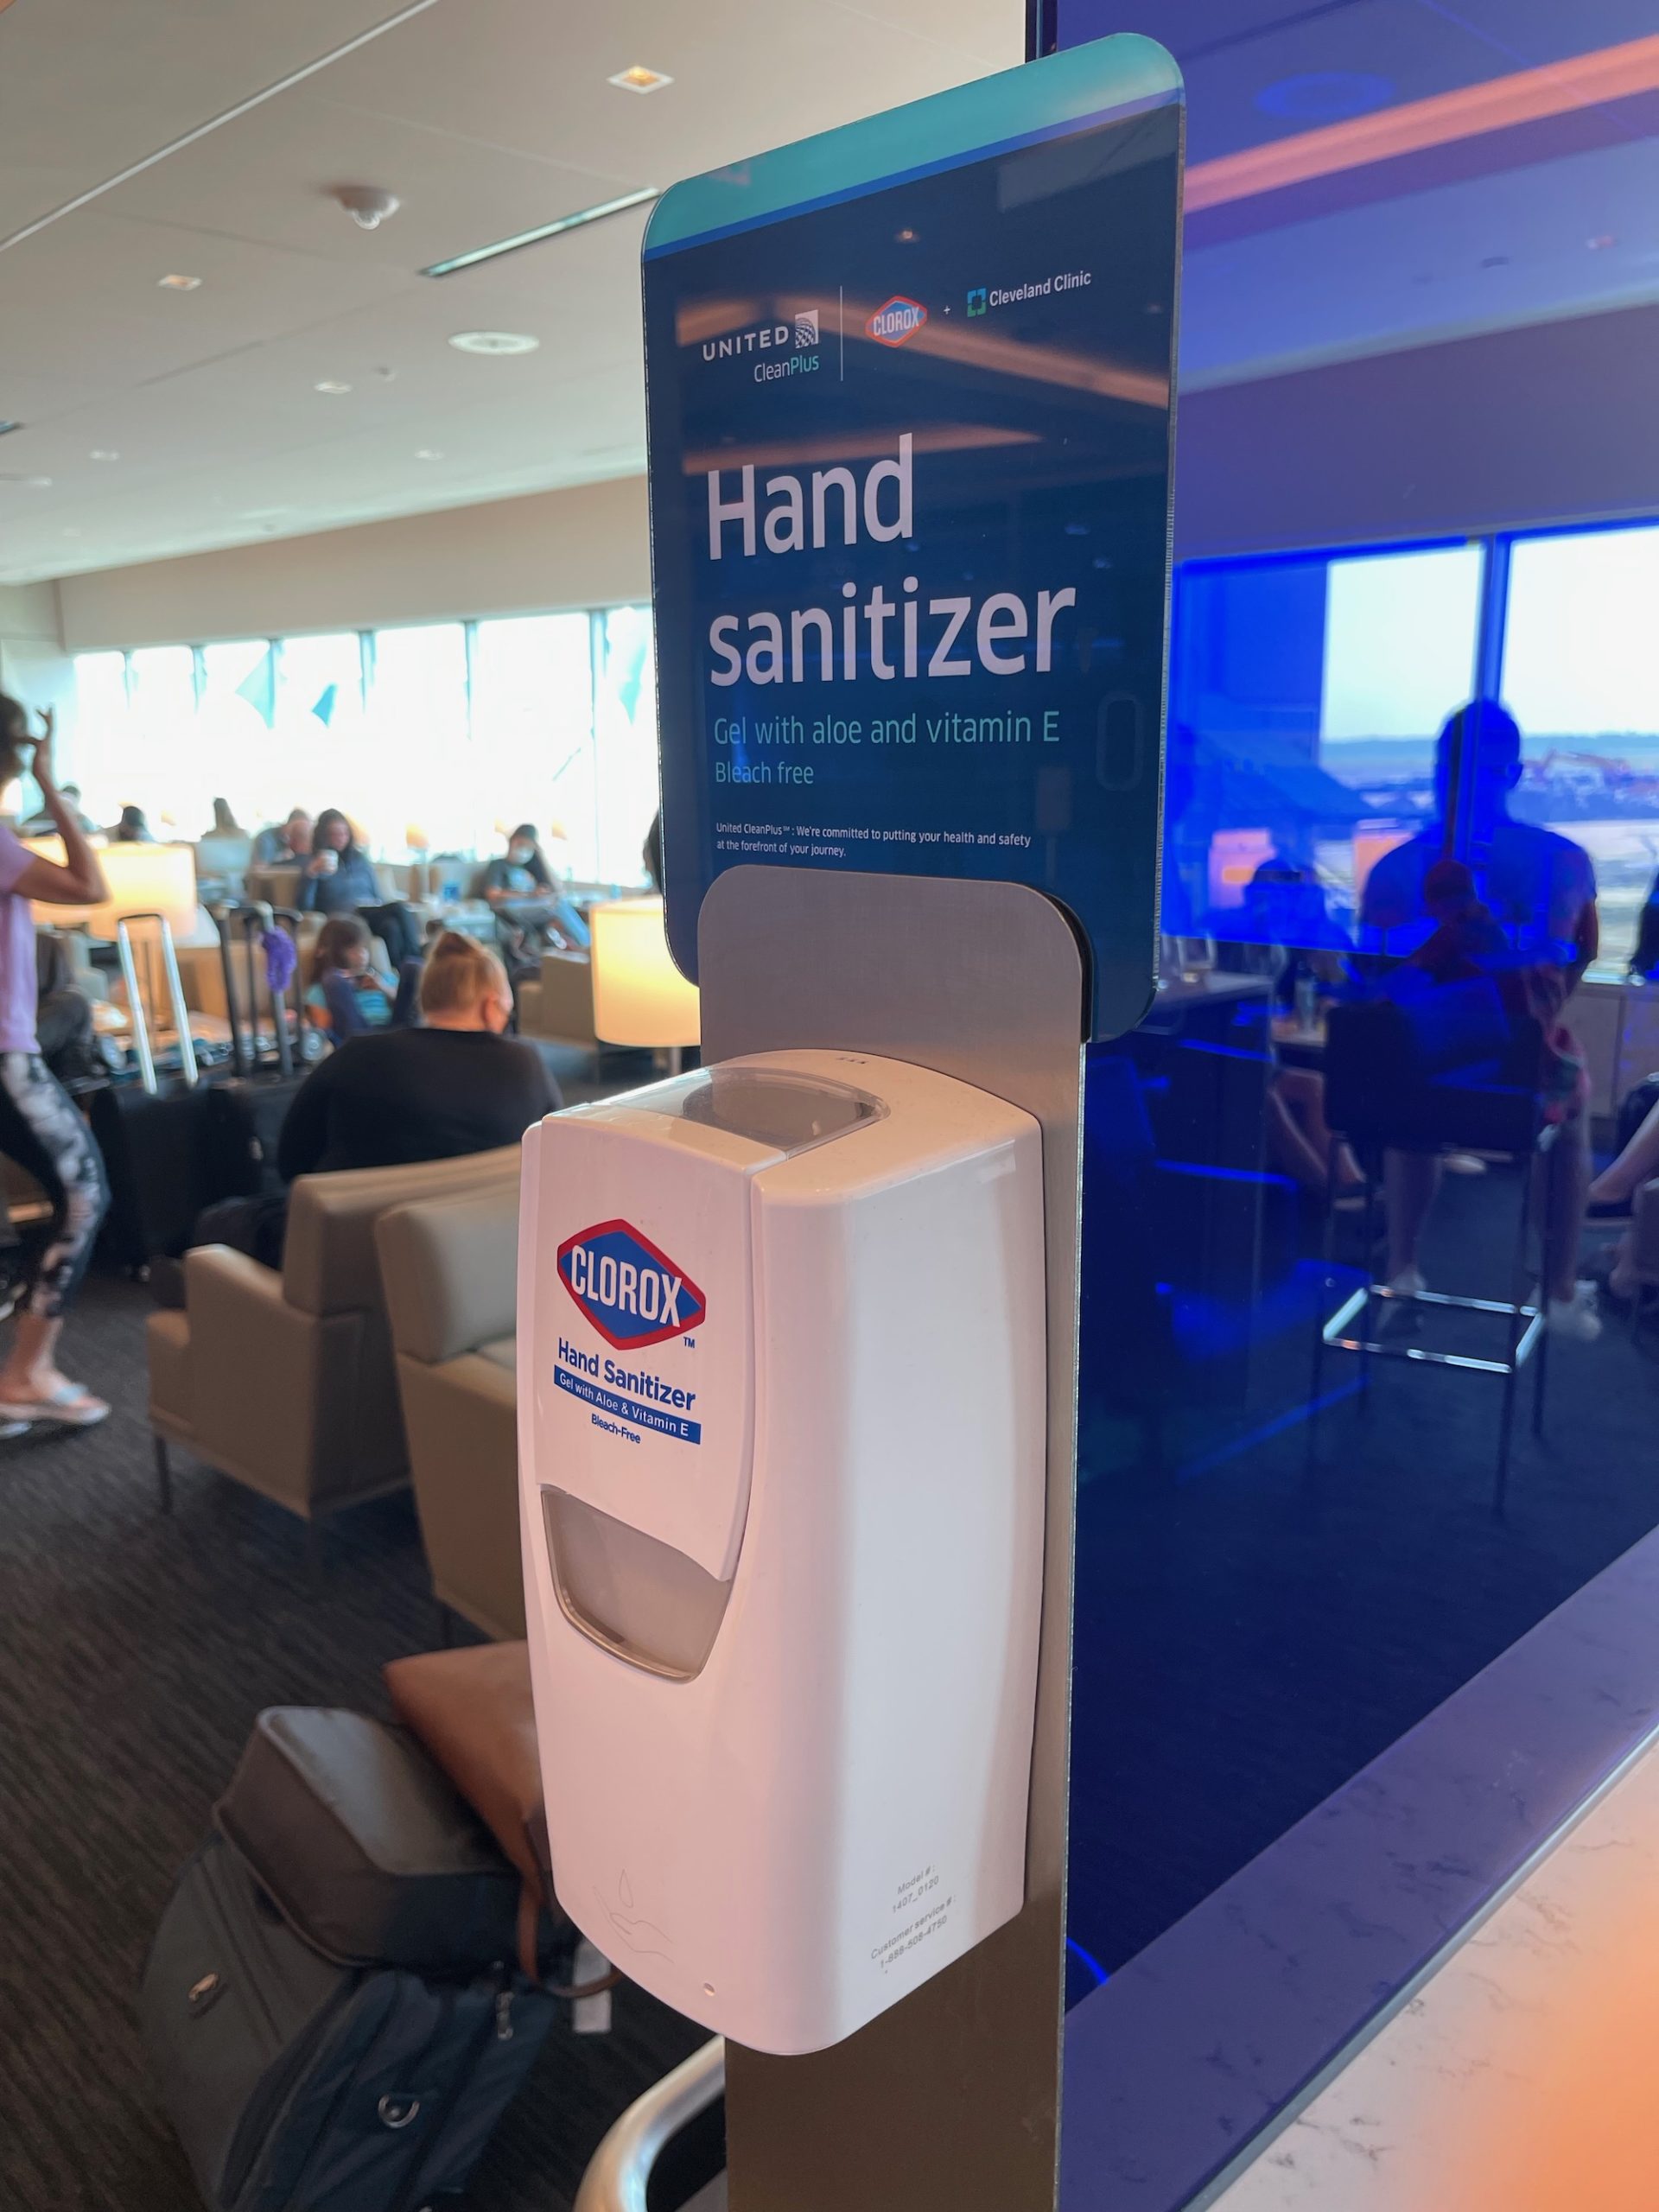 a hand sanitizer dispenser in a room with people